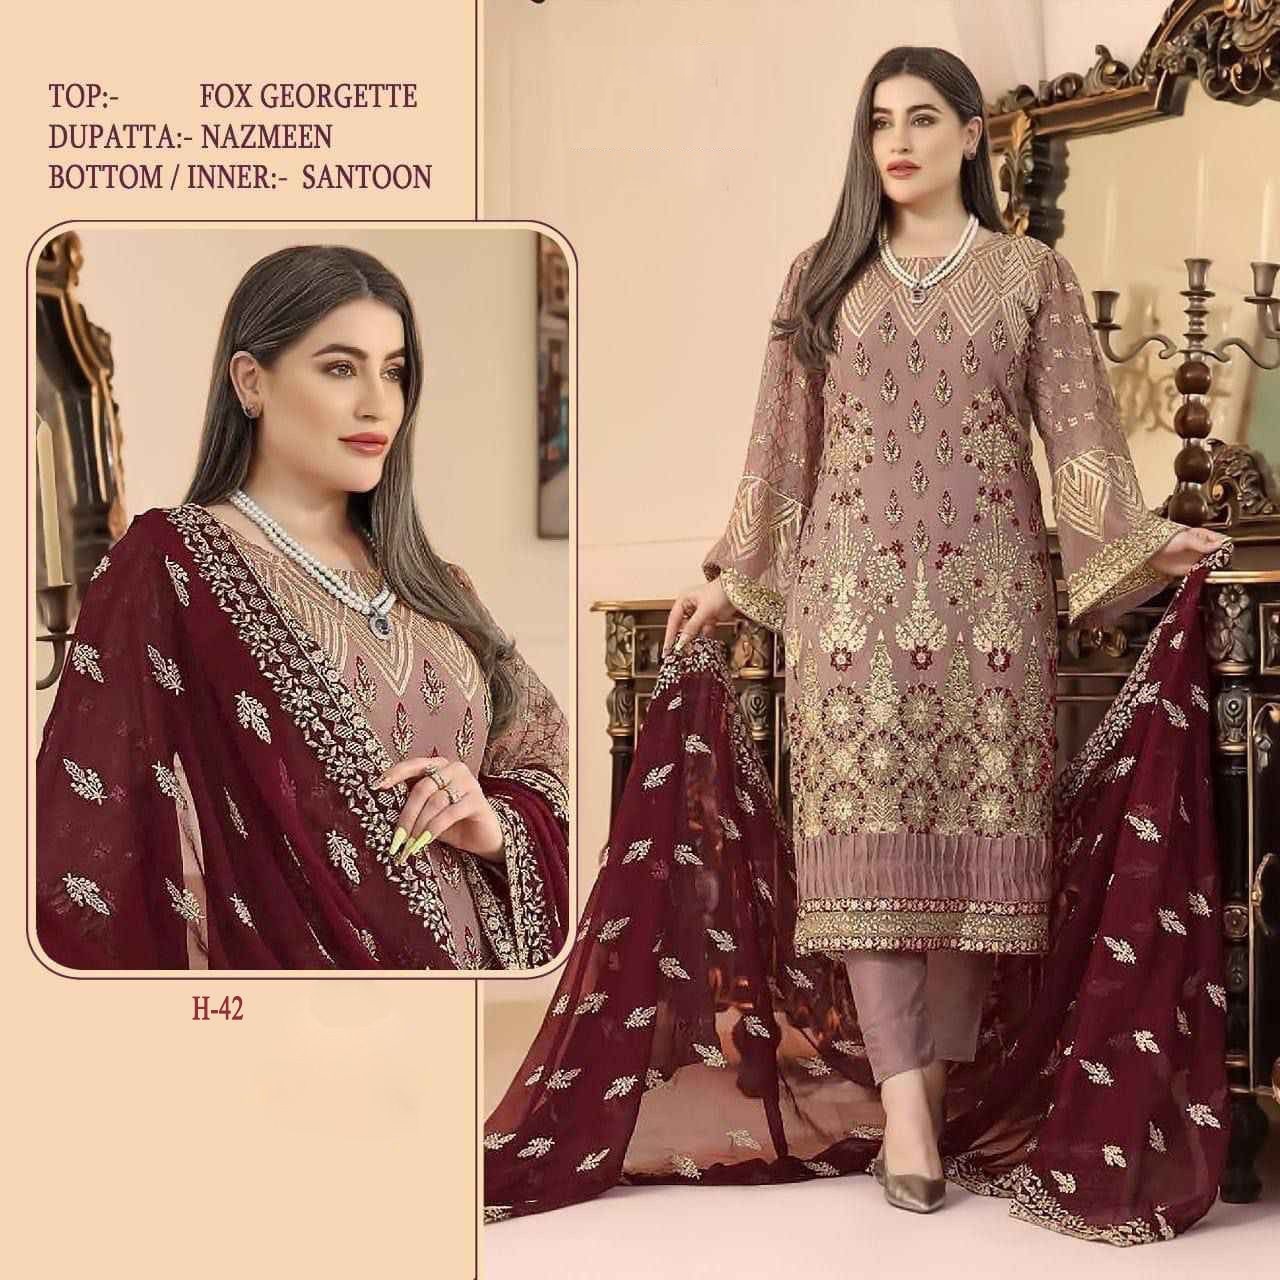 NEW INDIAN DESIGNER HEAVY FAUX GEORGETTE SEQUENCE CODING WORK PAKISTANI SUIT  | eBay